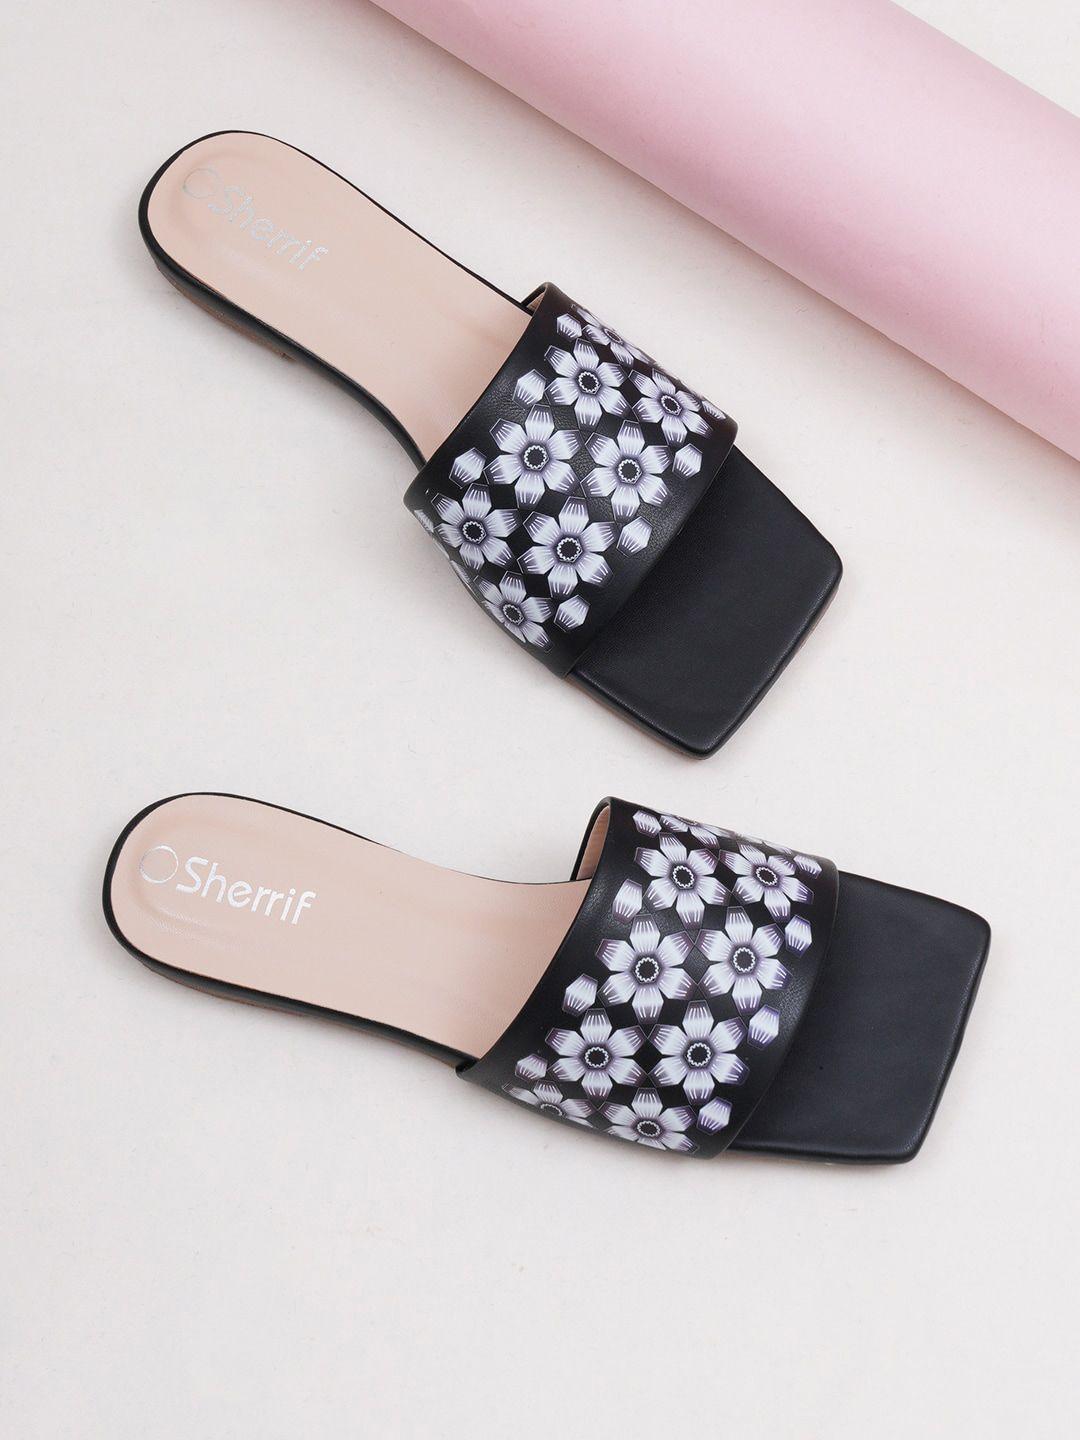 sherrif shoes women black printed open toe flats with bows